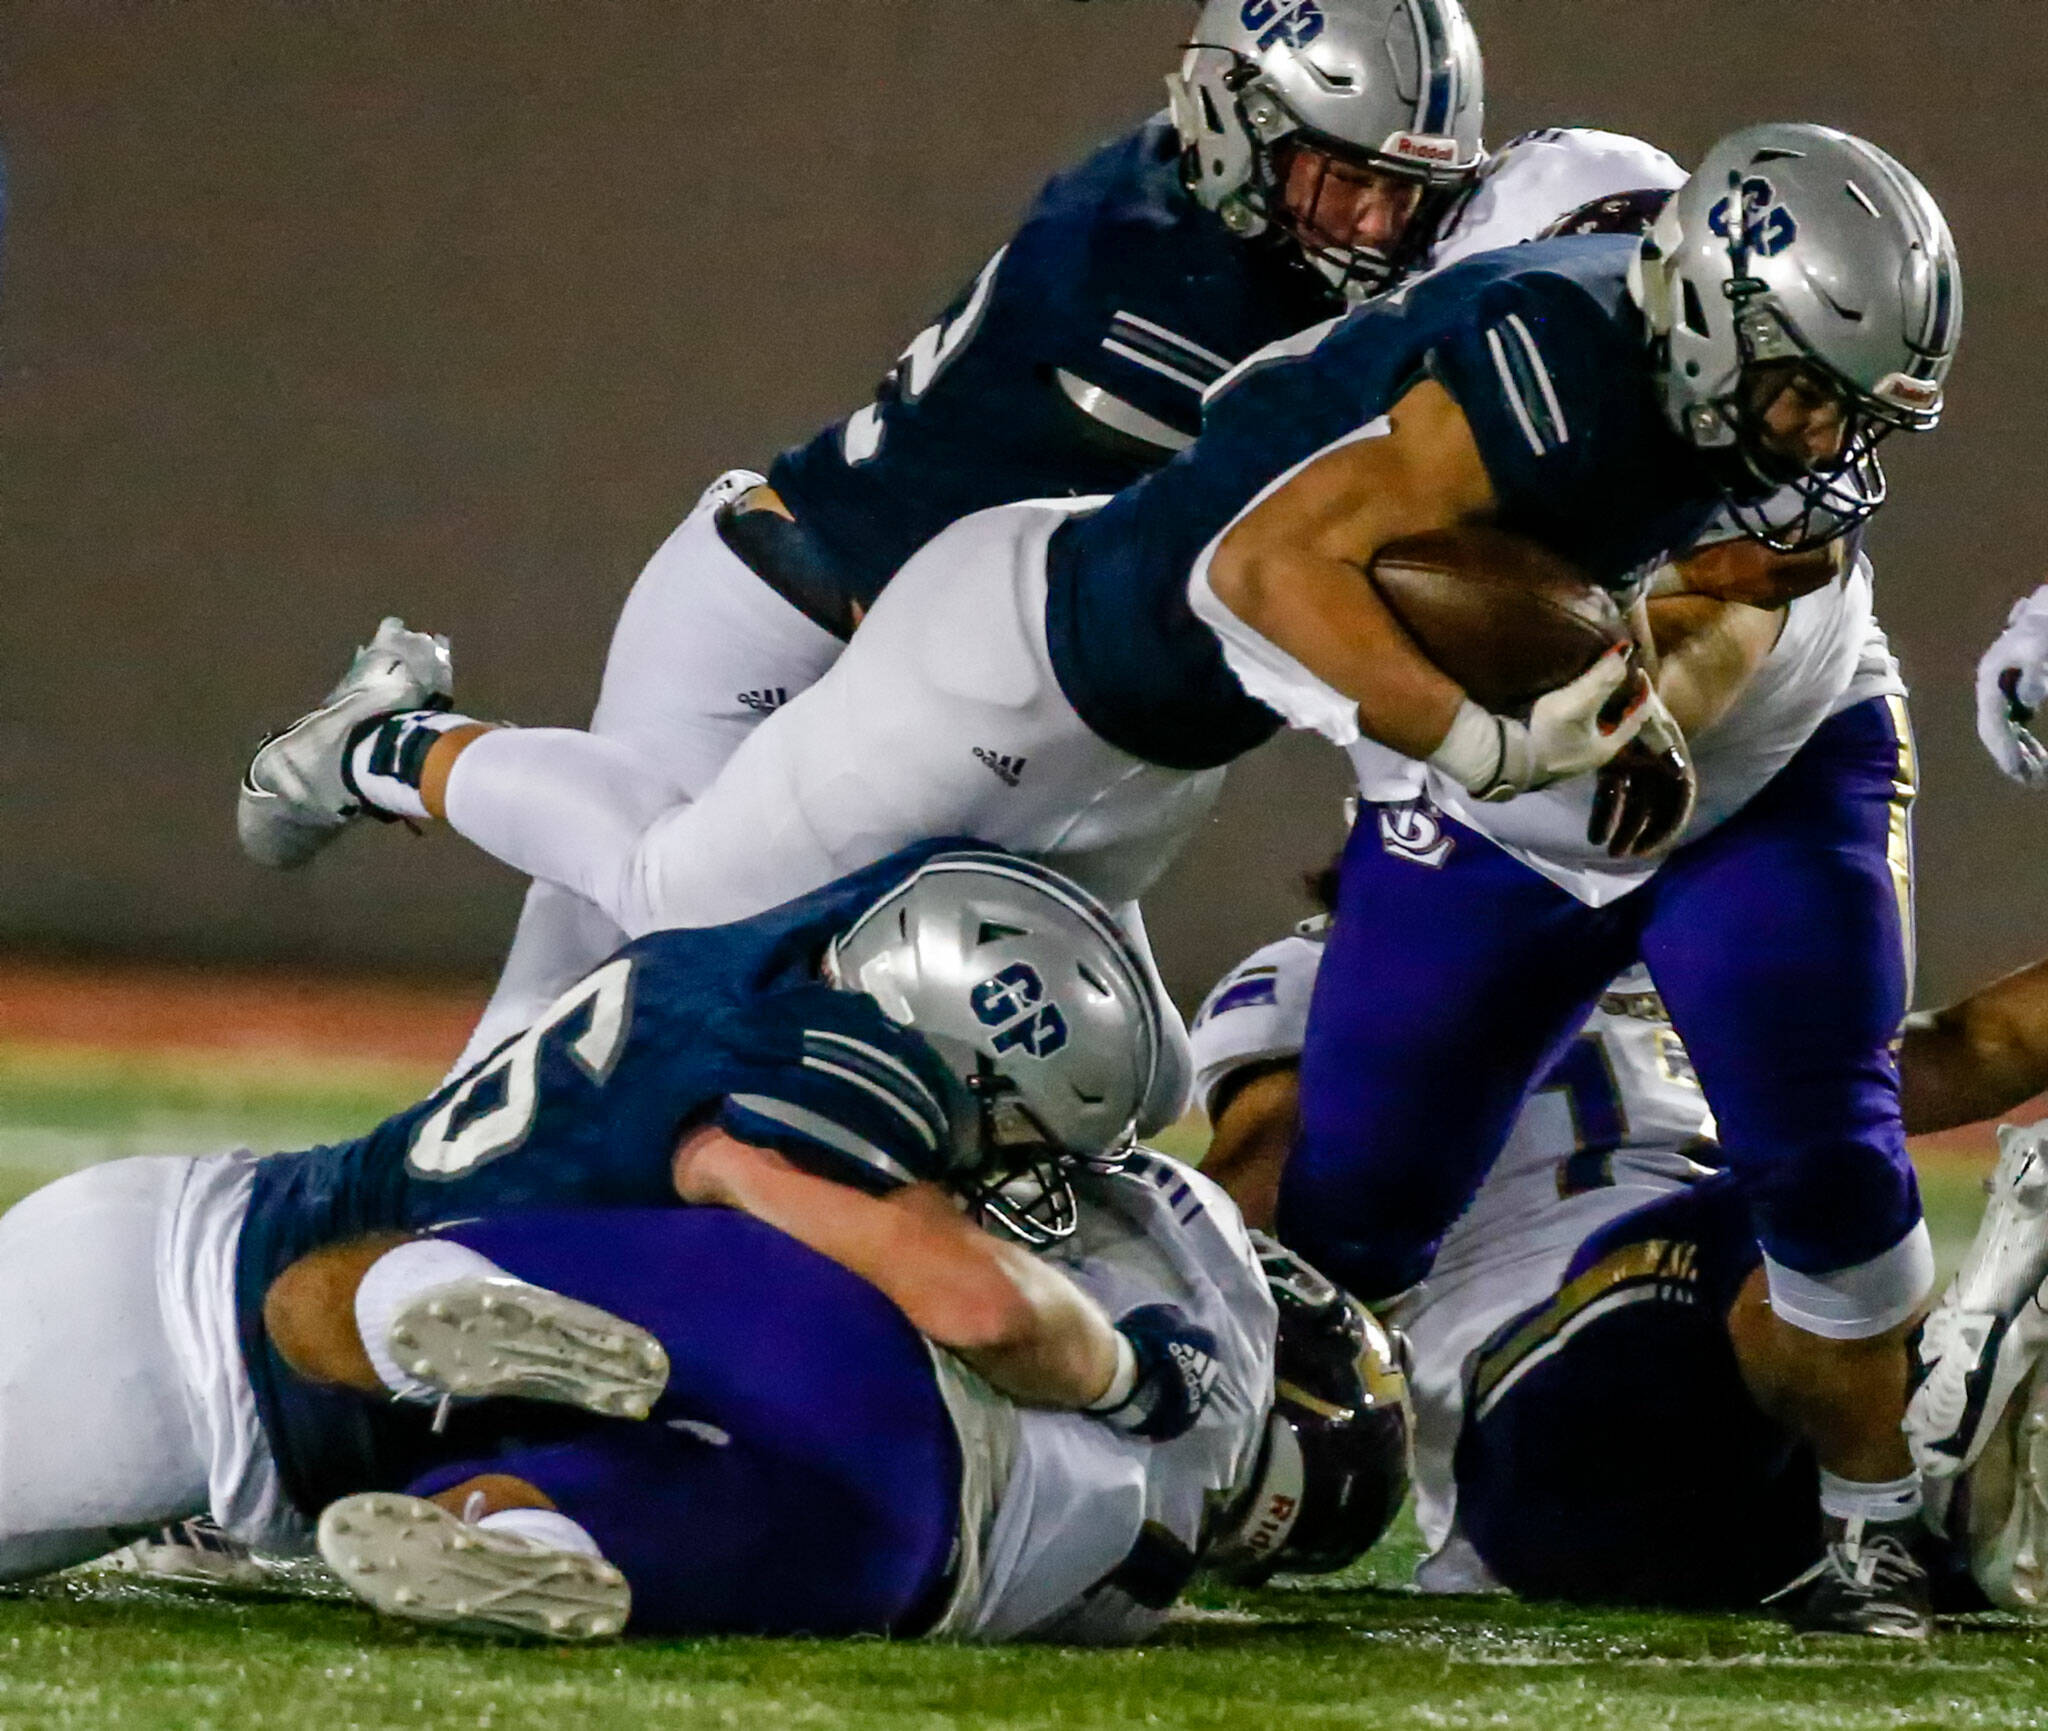 Top-ranked Glacier Peak and third-ranked Lake Stevens are set to square off for the Wesco 4A title Friday night in a heavyweight showdown of state championship contenders. (Kevin Clark / The Herald)